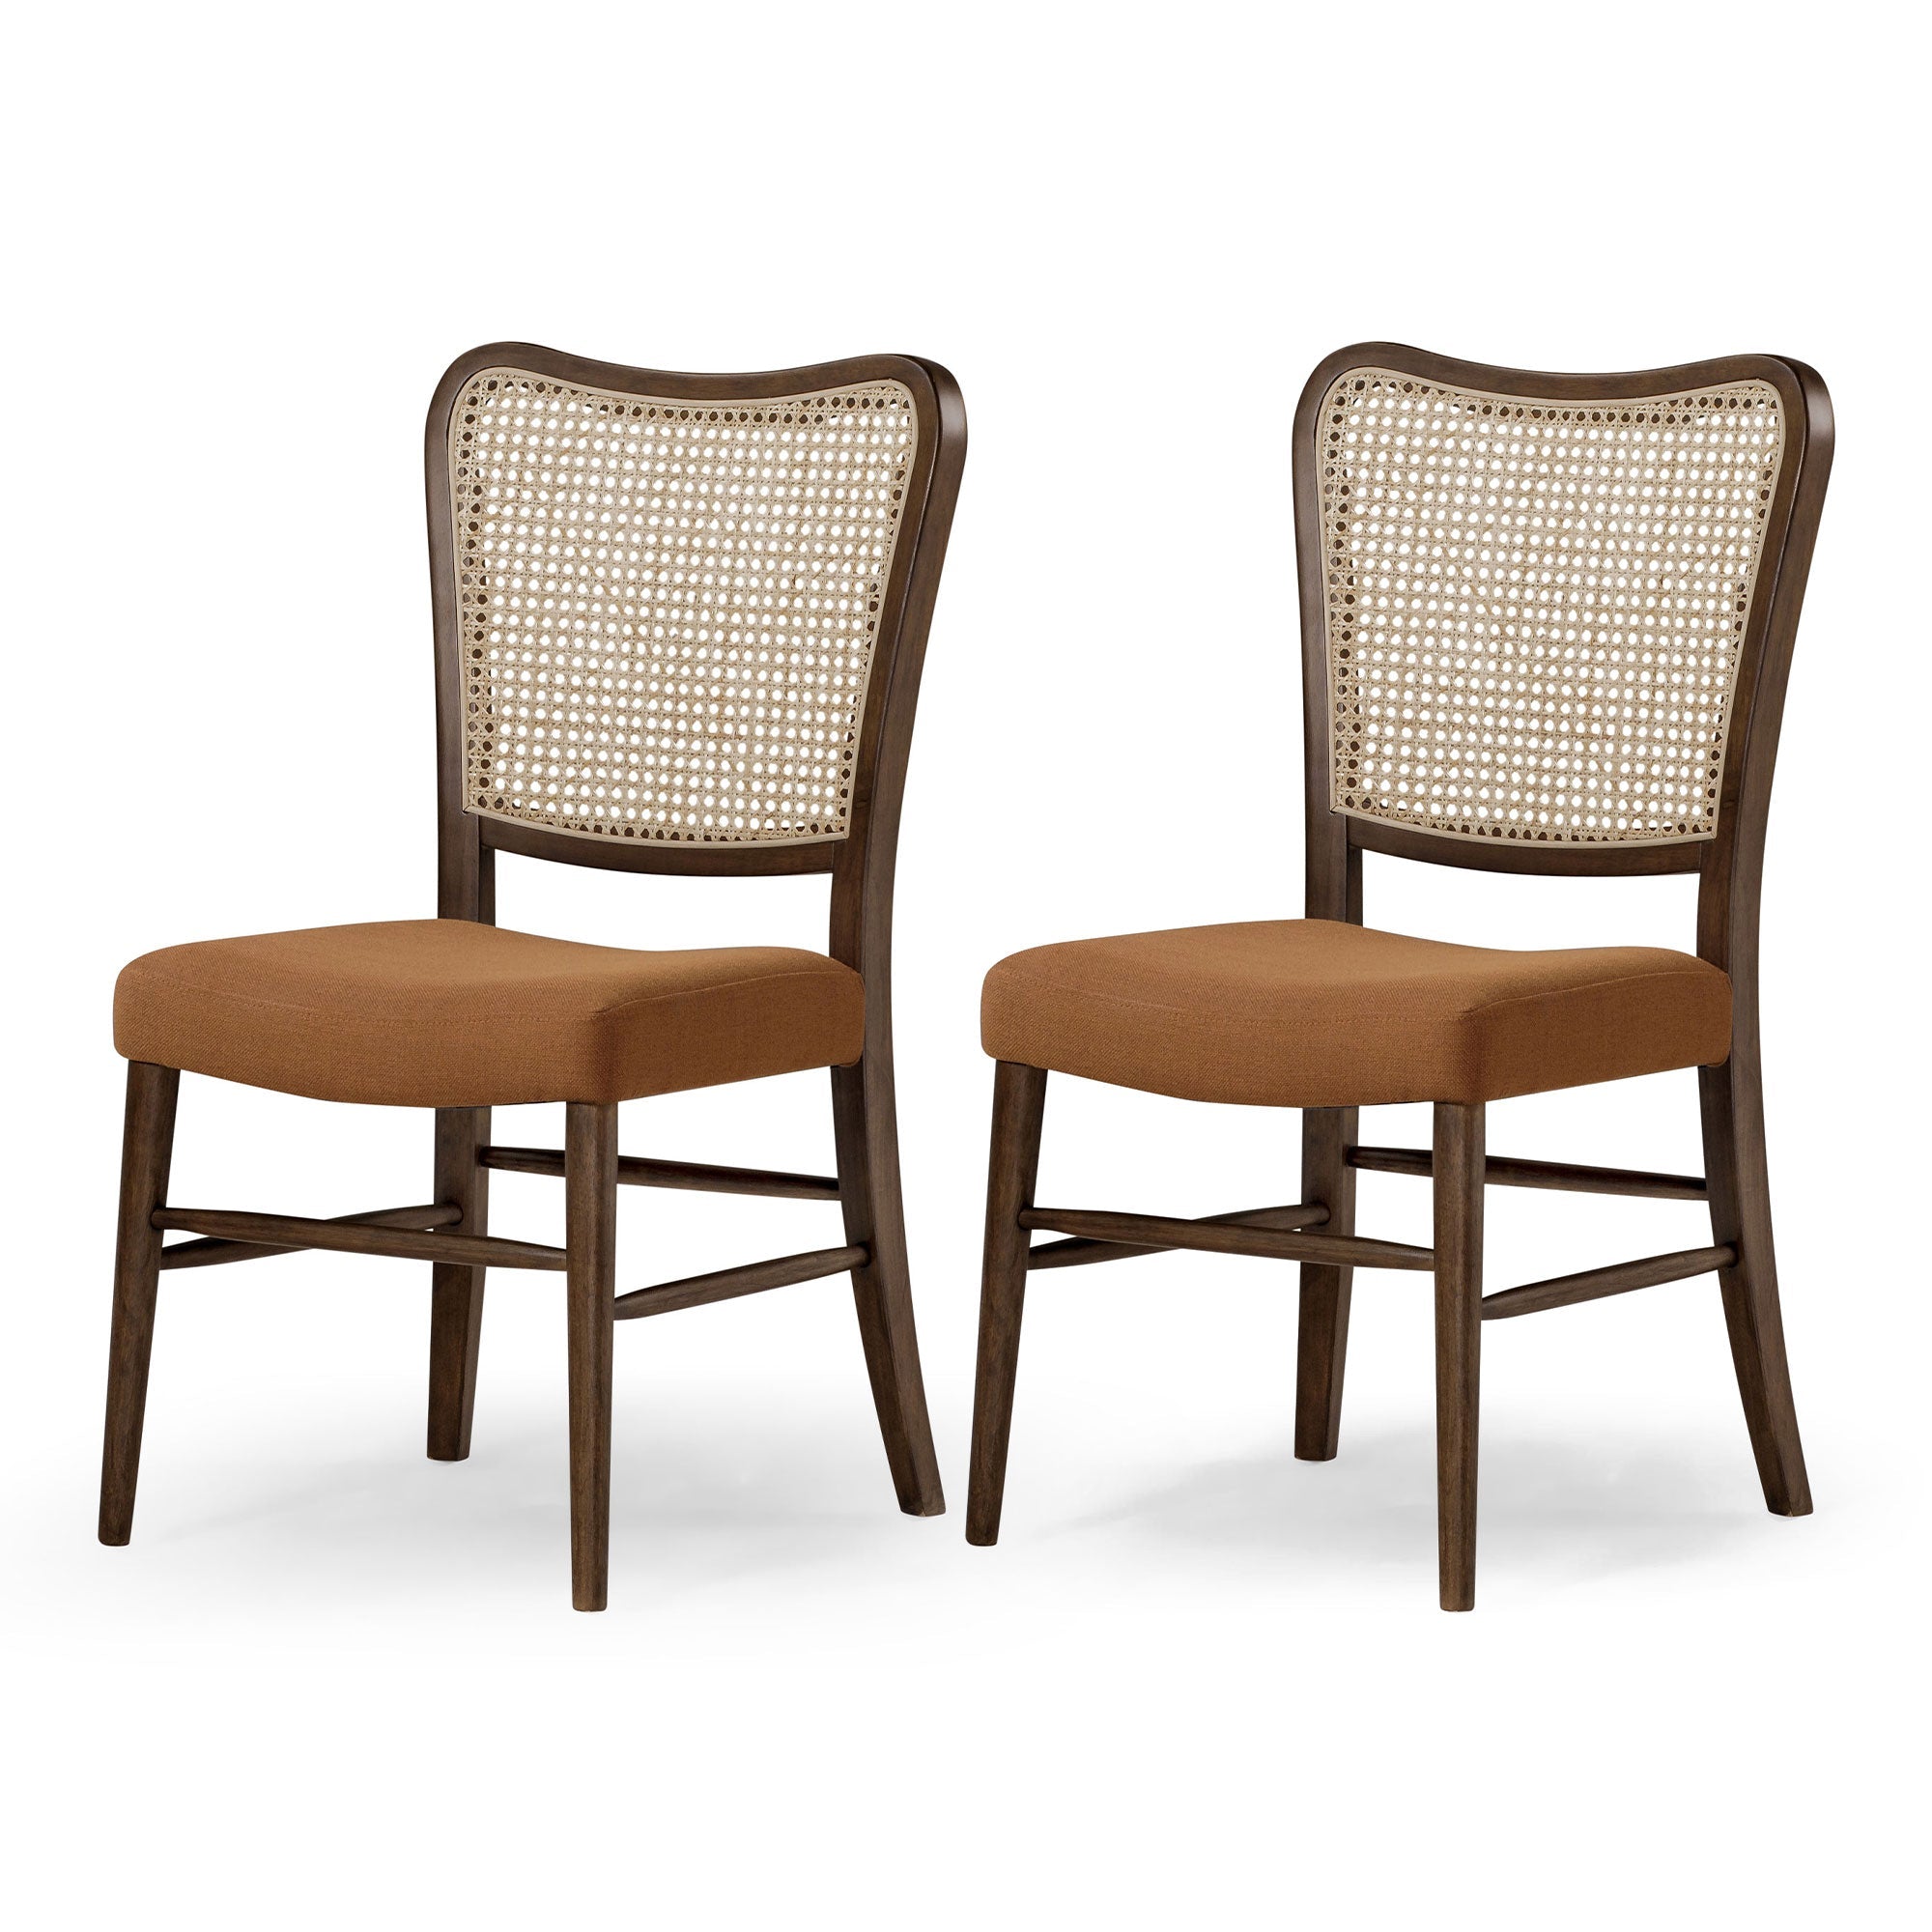 Vera Classical Wooden Dining Chair in Antiqued Brown Finish with Clay Canvas Fabric Upholstery, Set of 2 in Dining Furniture by Maven Lane